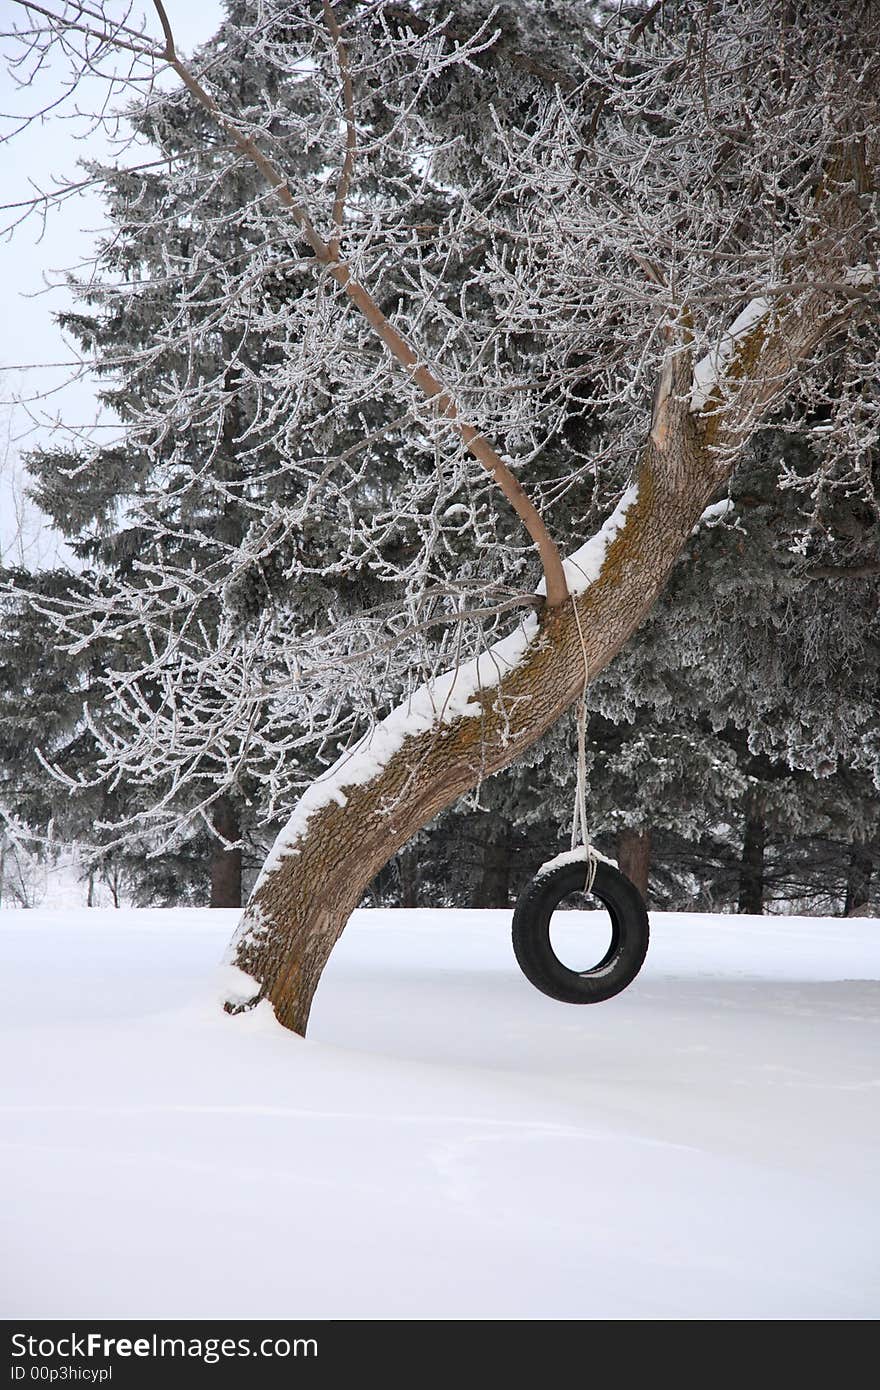 A lonely and cold tire swing hanging completely still from a large tree in the winter